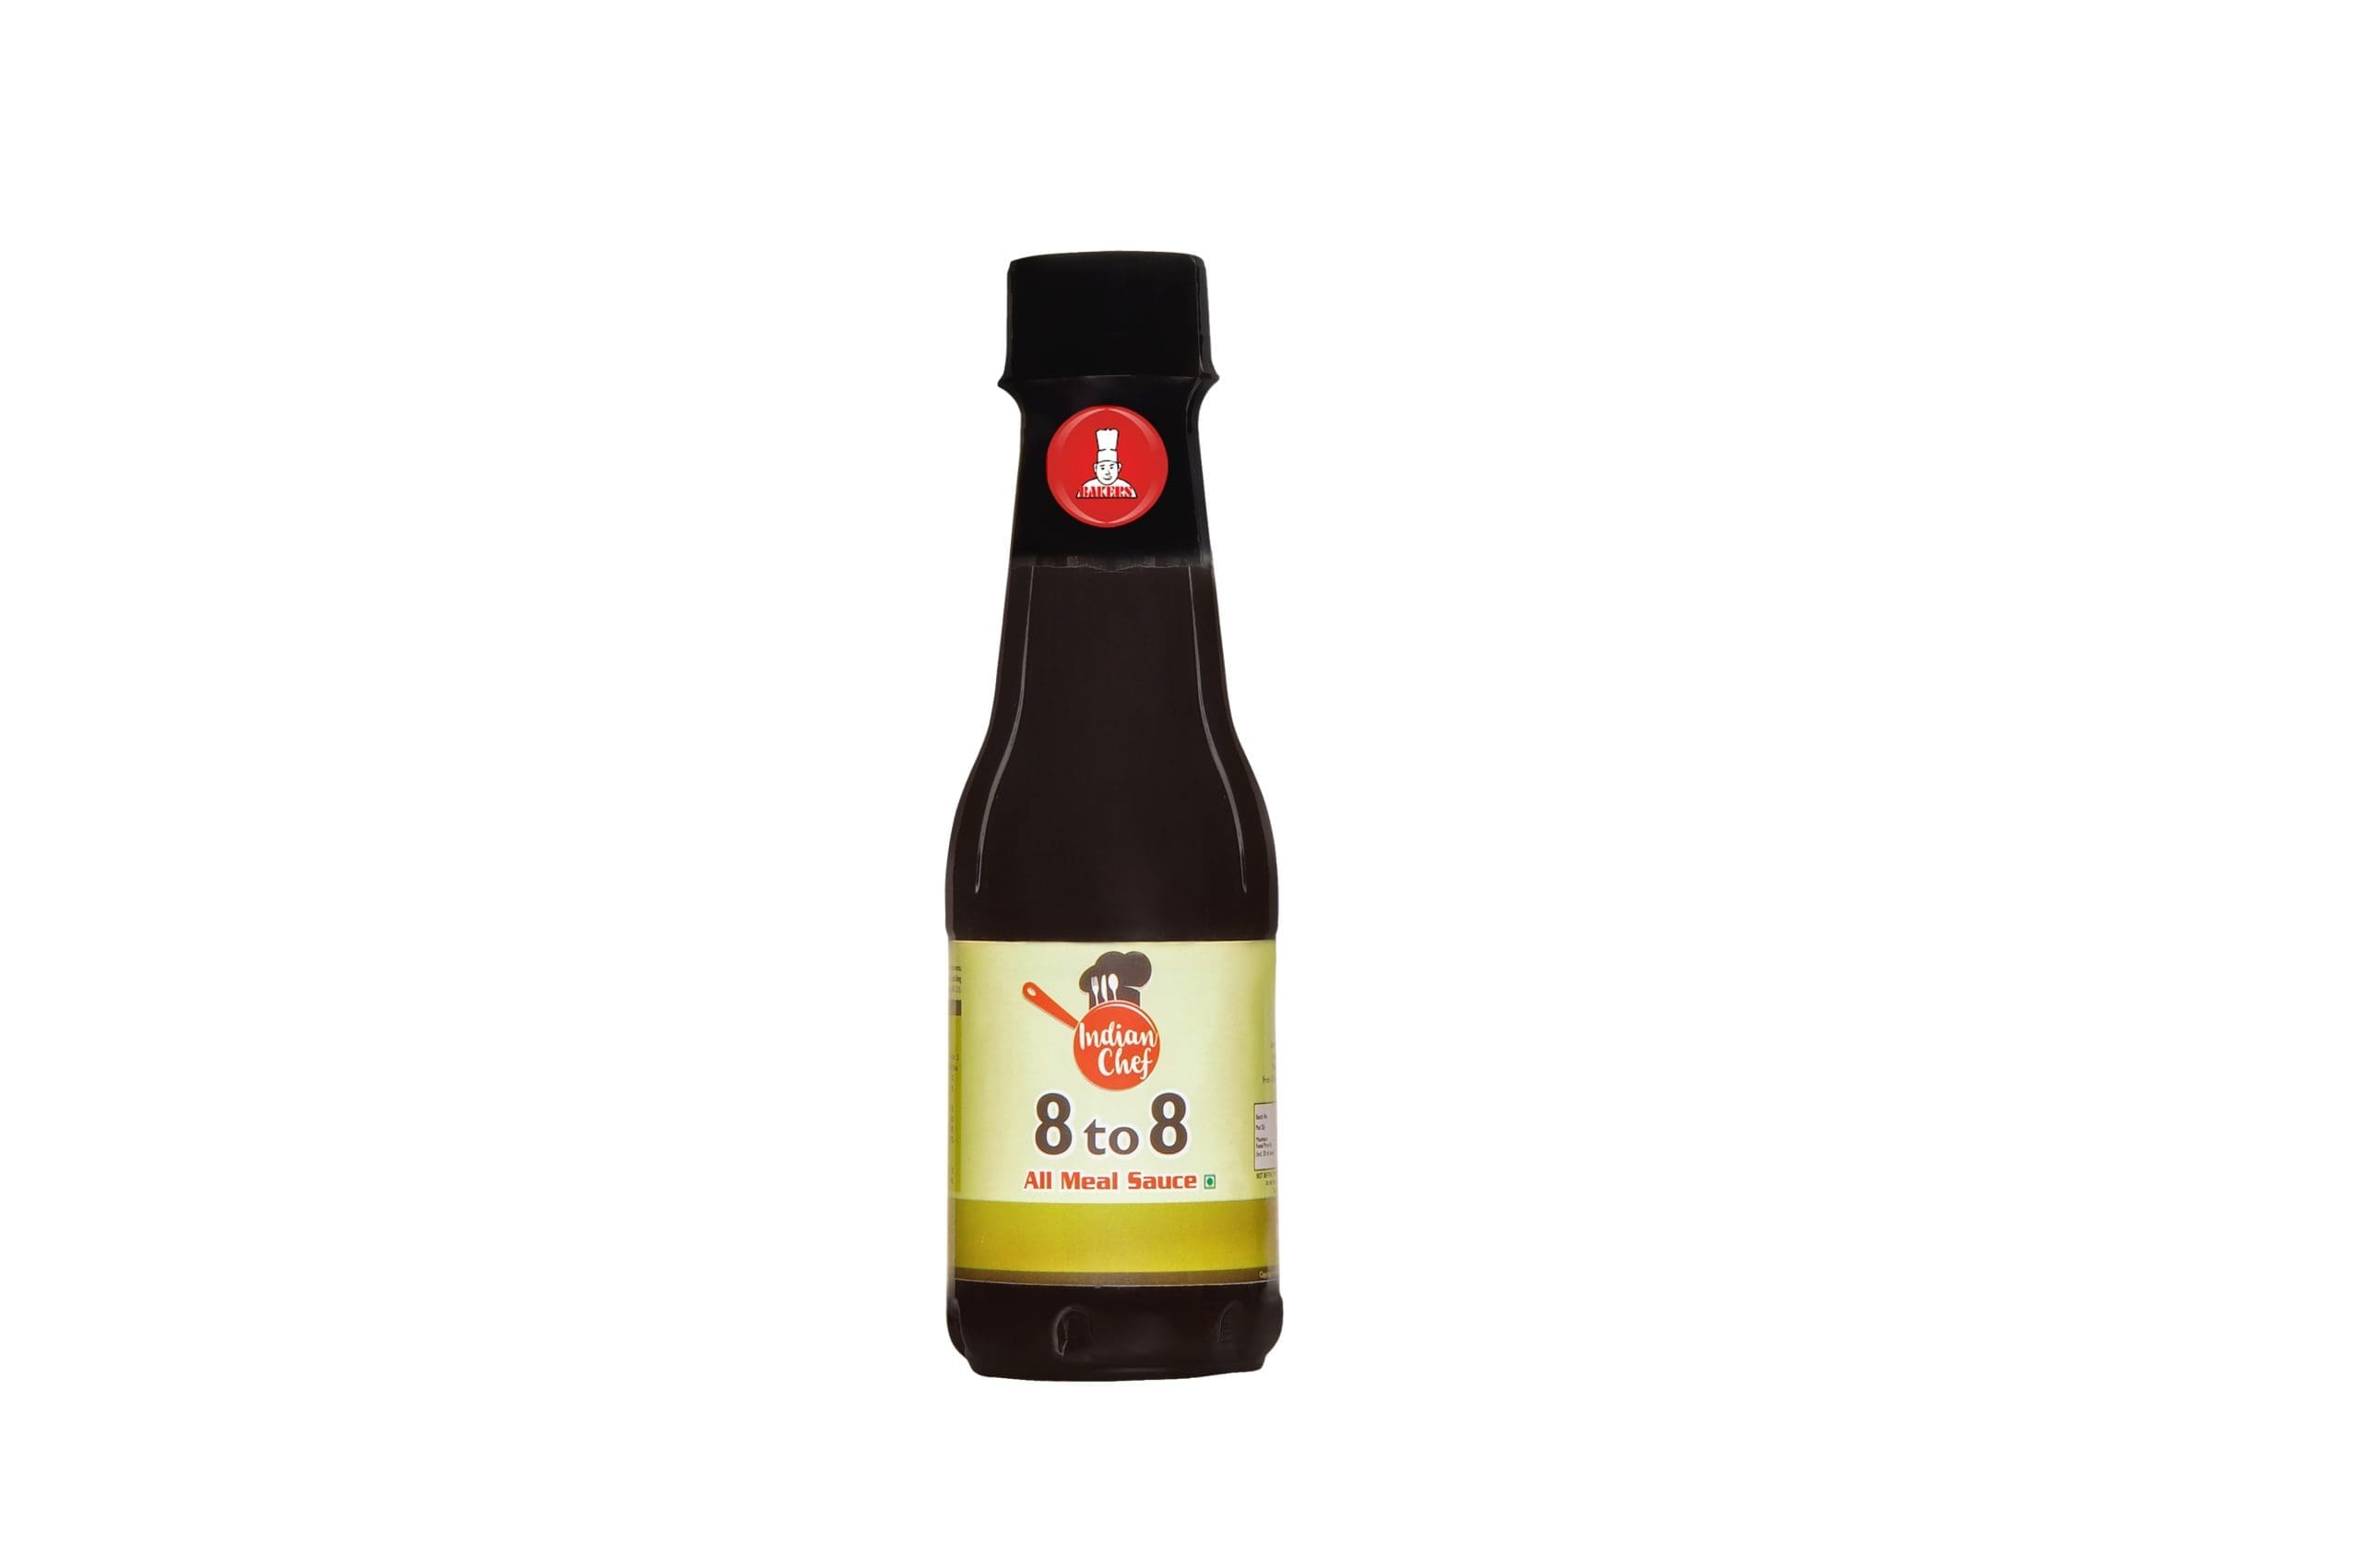 Bakers Indian Chef 8 to 8 All meal Sauce